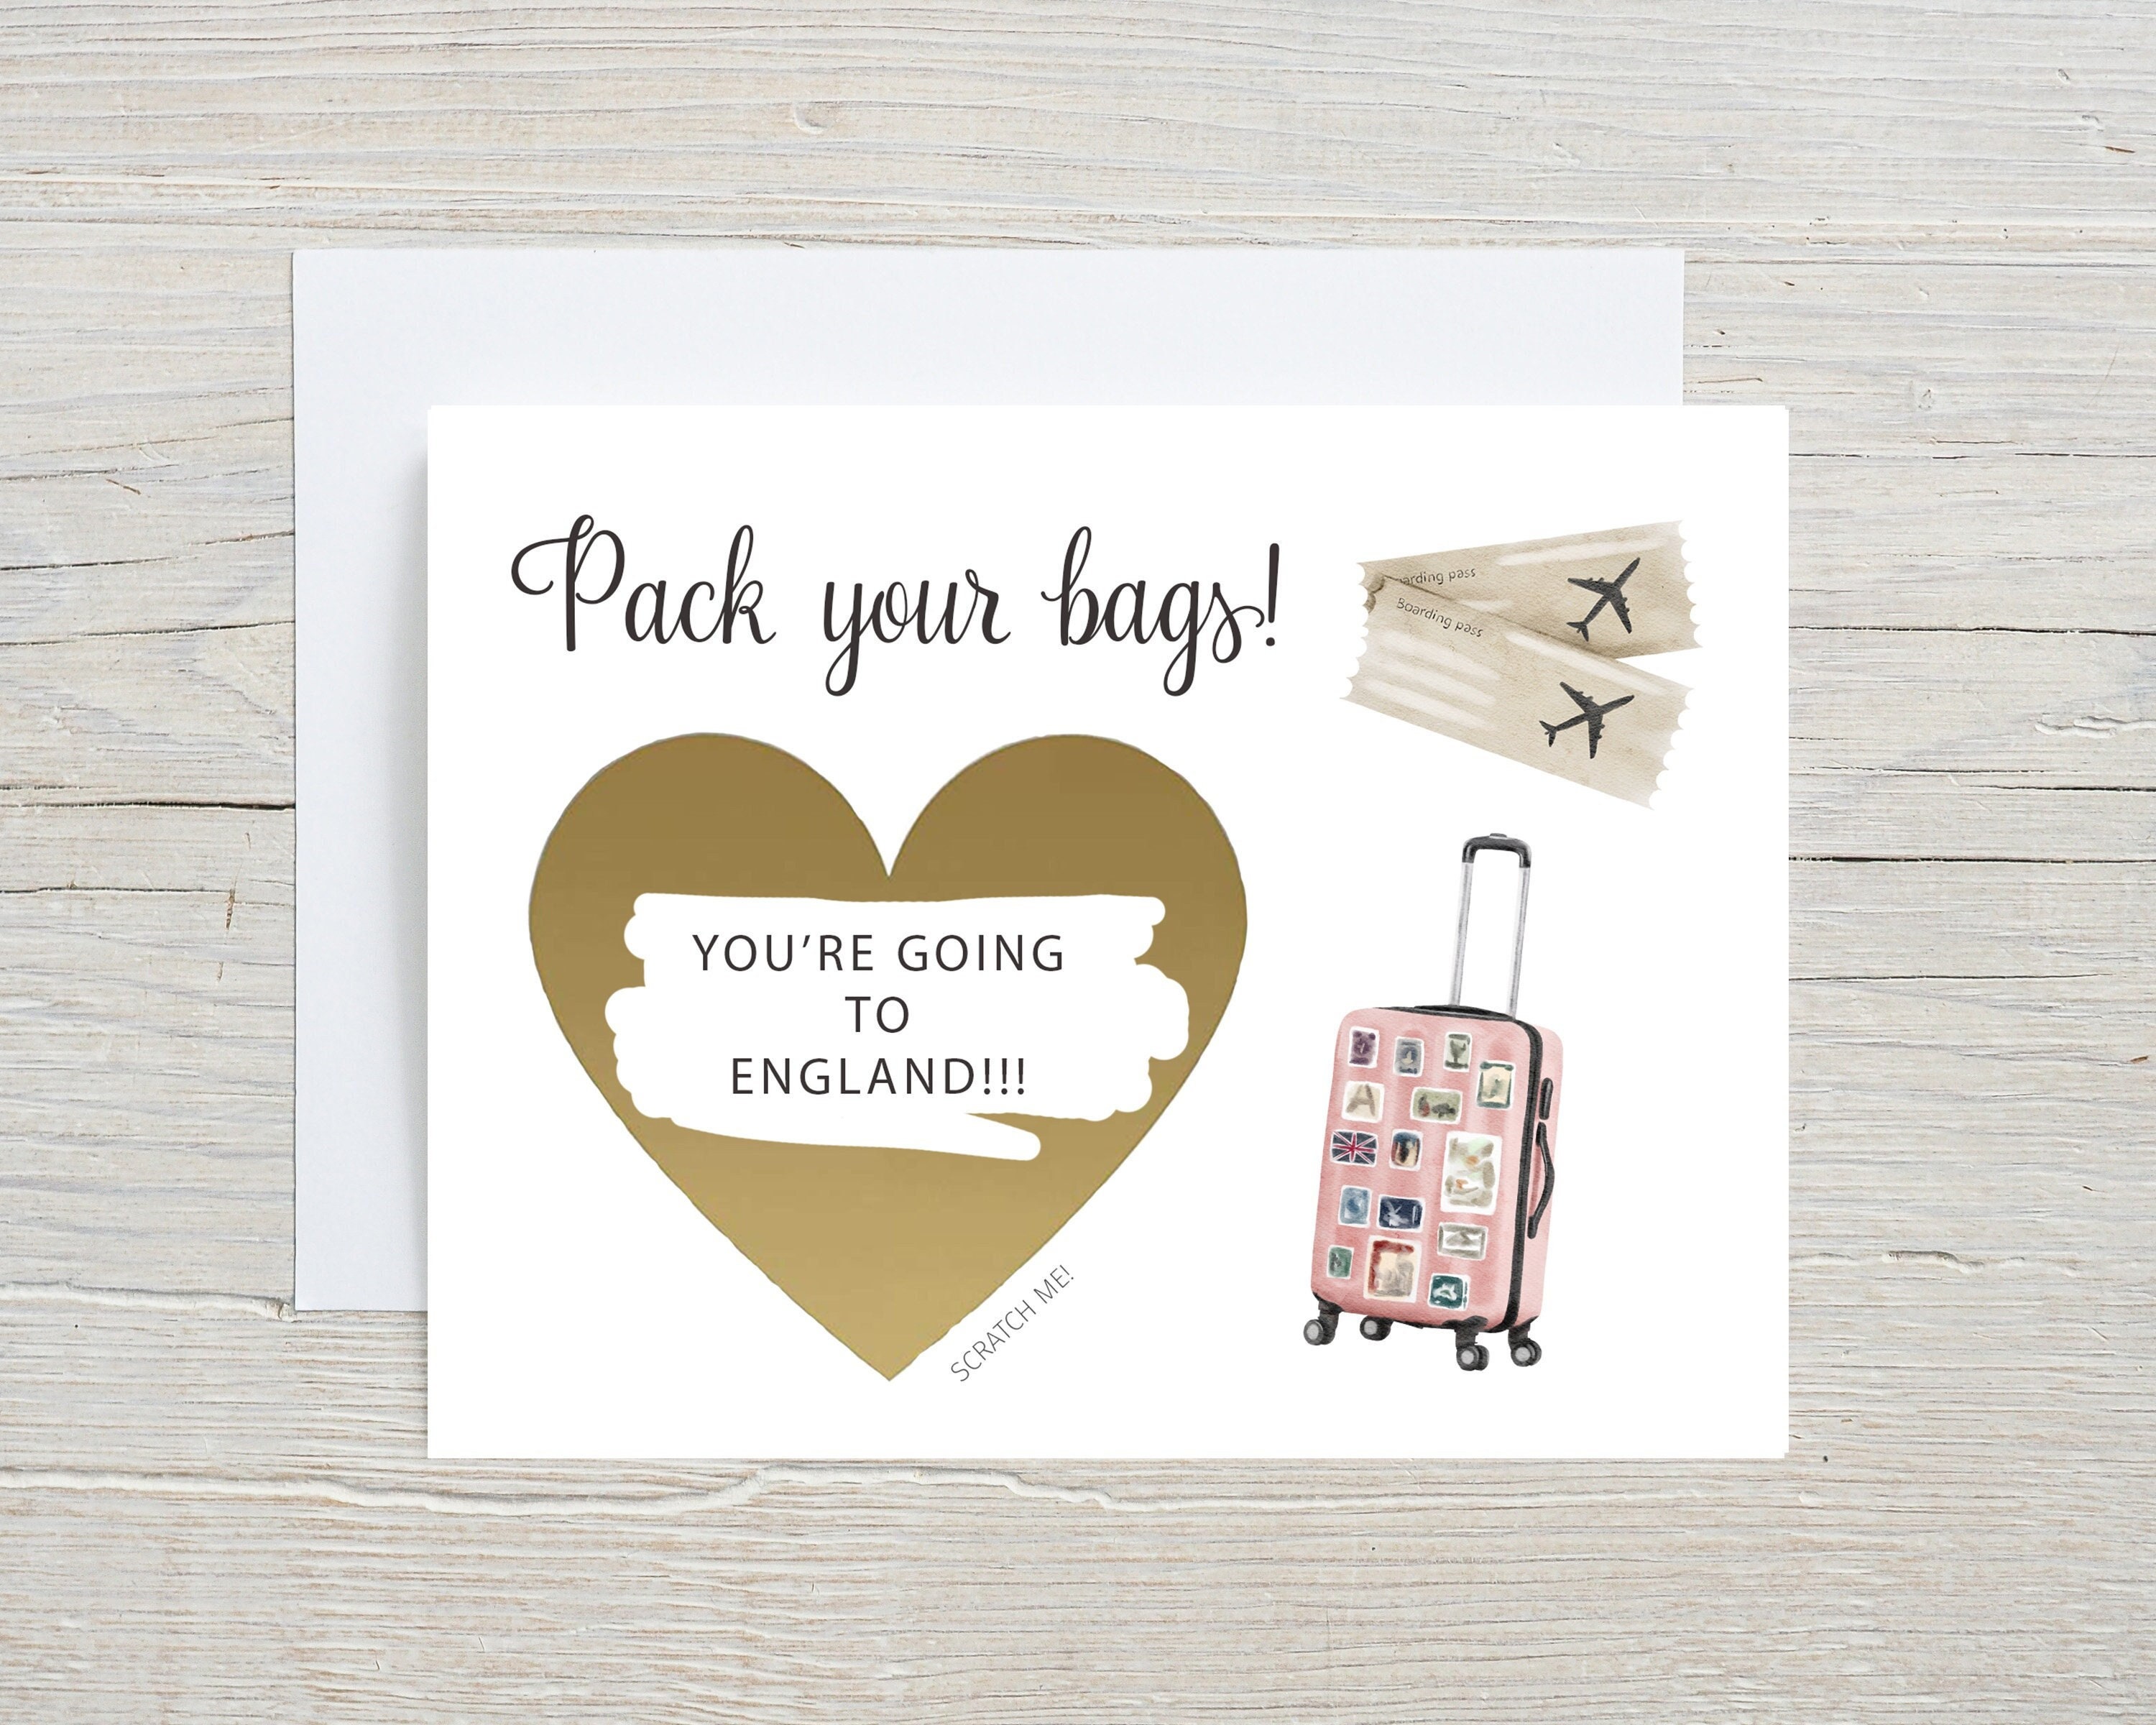 Pin on Pack Your Bags!